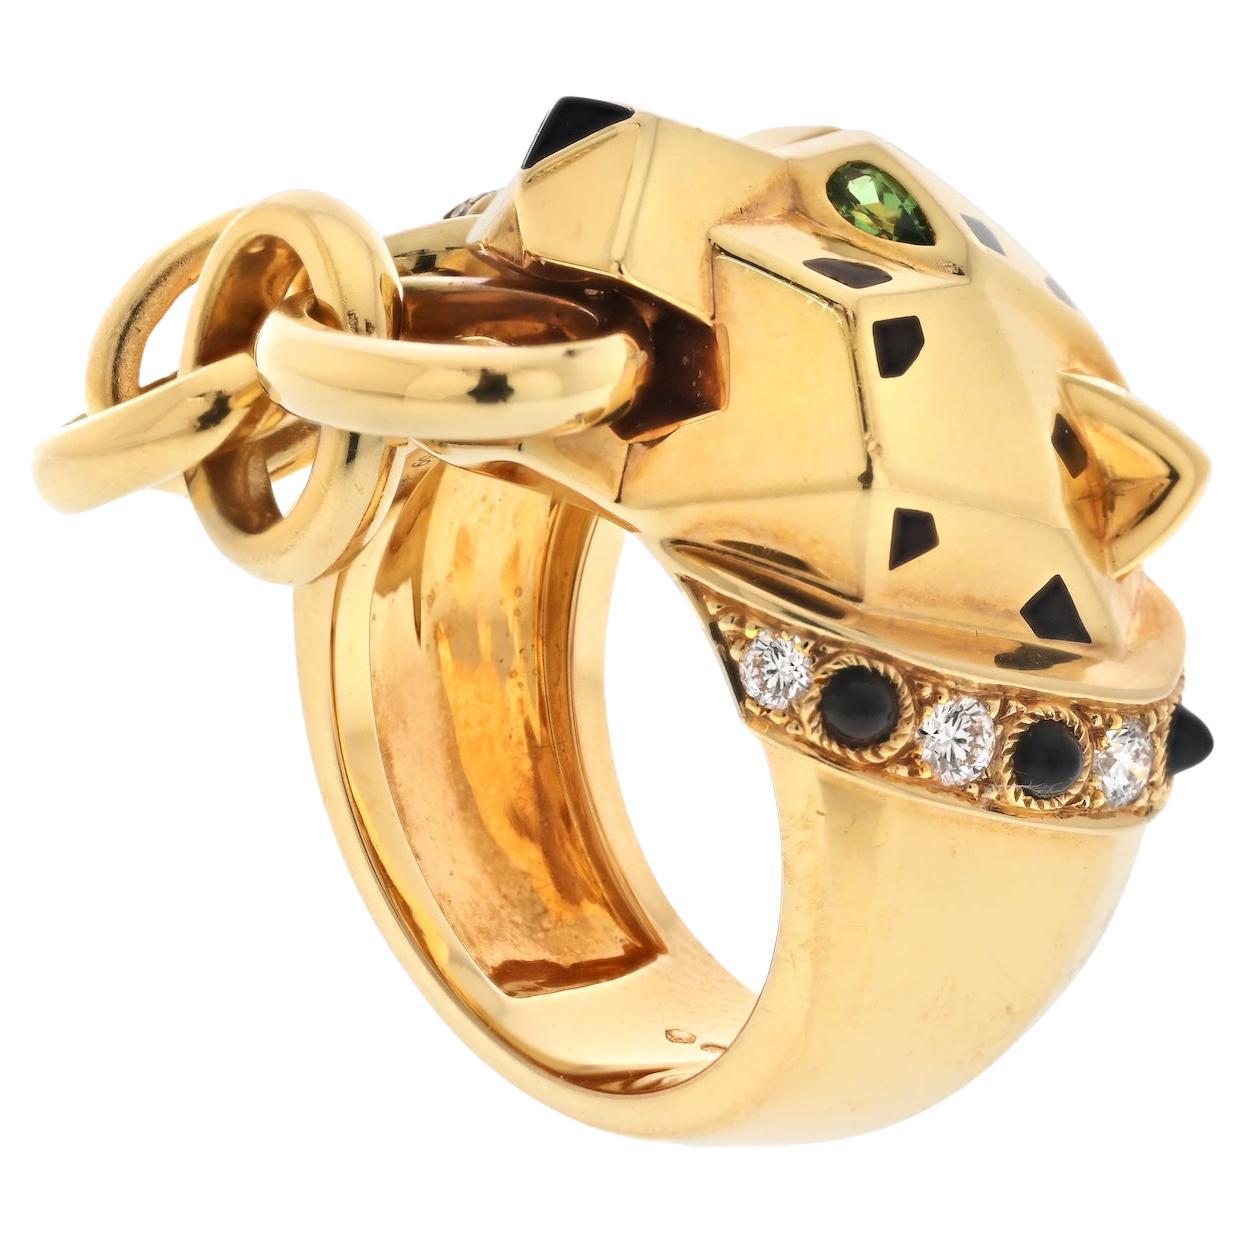 Elevate your style with this exquisite piece of high-quality luxury jewelry from Cartier. Meticulously crafted in 18kt Yellow Gold, this masterpiece features a stunning Panther head motif adorned with precious details.

The Panther's head showcases